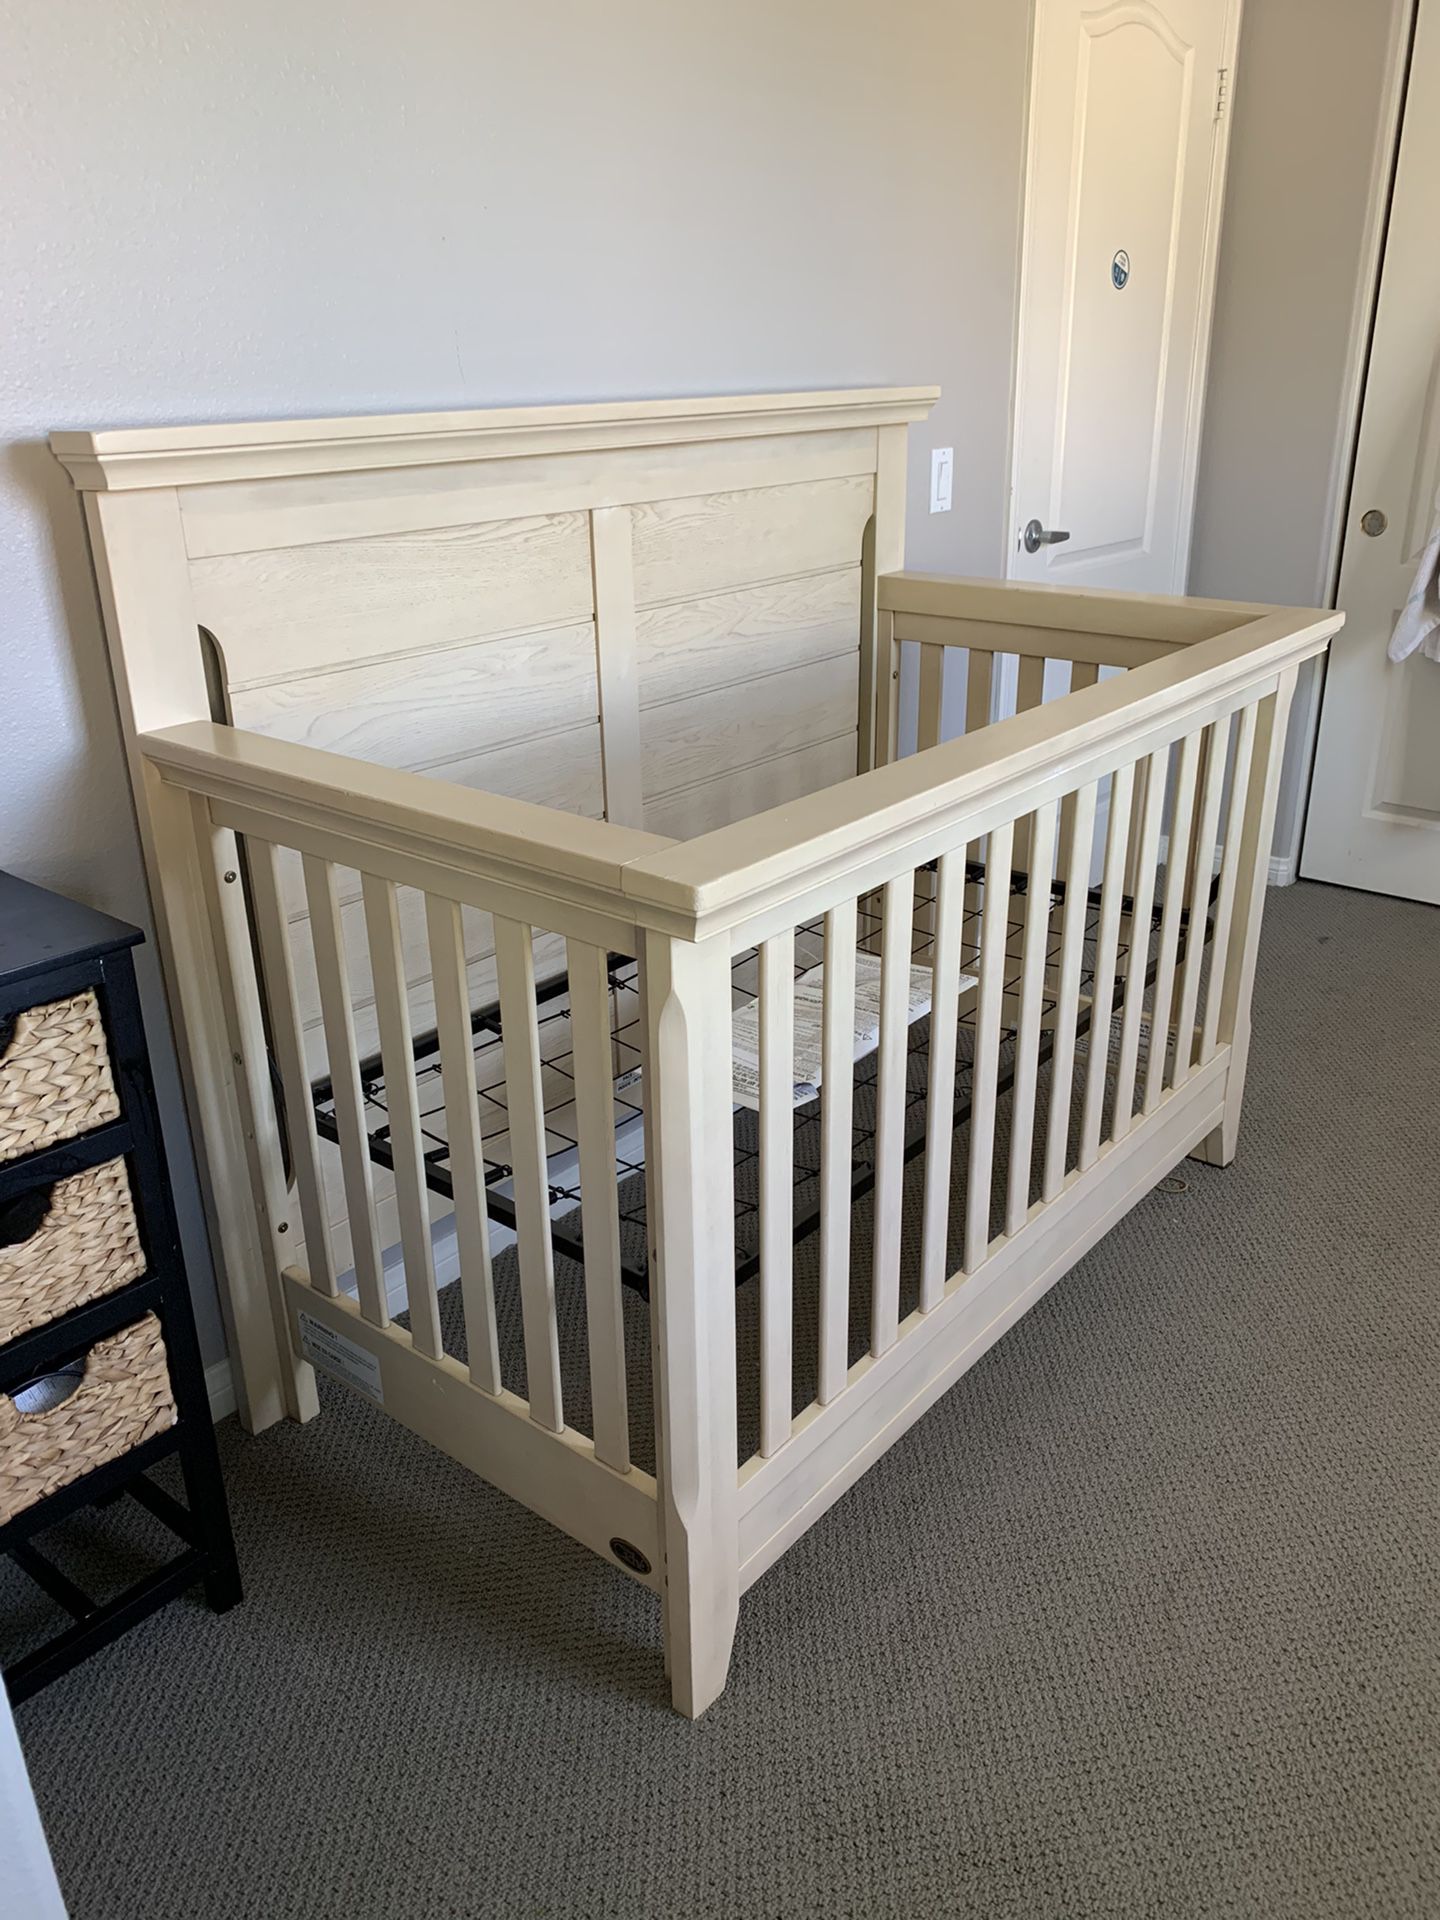 Baby Caché Overland 4-in-1 Convertible Crib in Sandstone for Sale